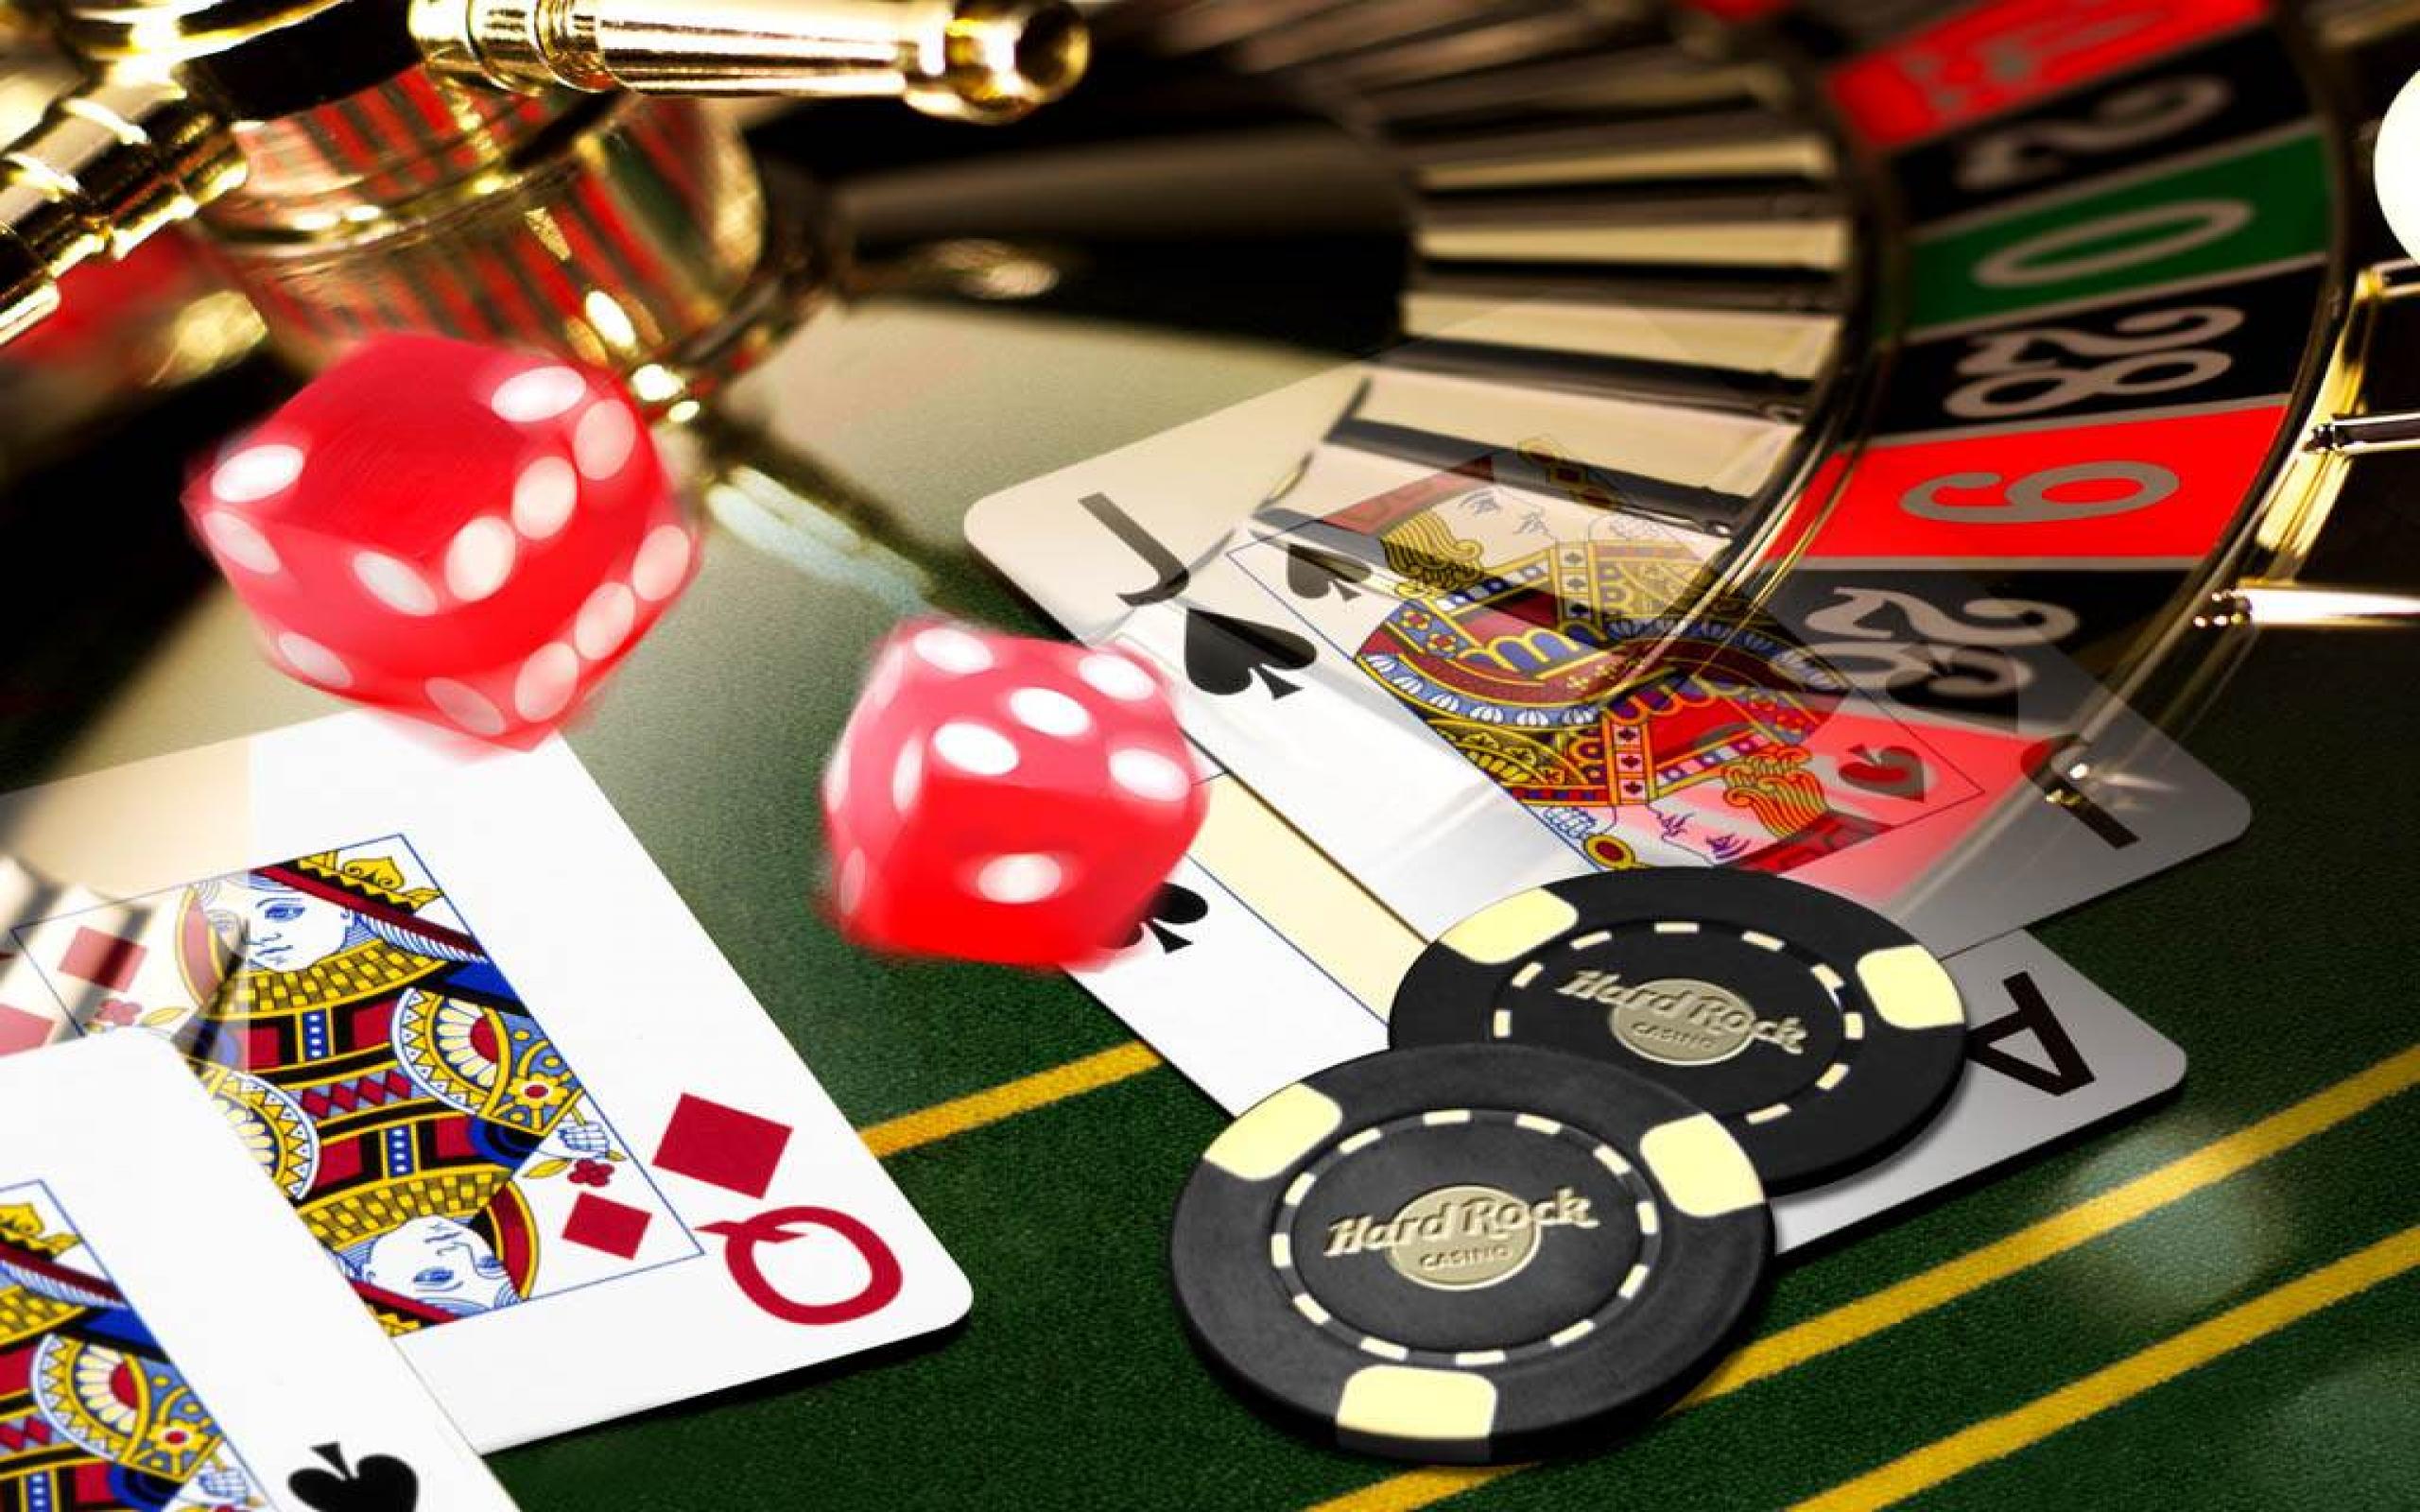 The best way to Affect 888bet’s Gambling Functions